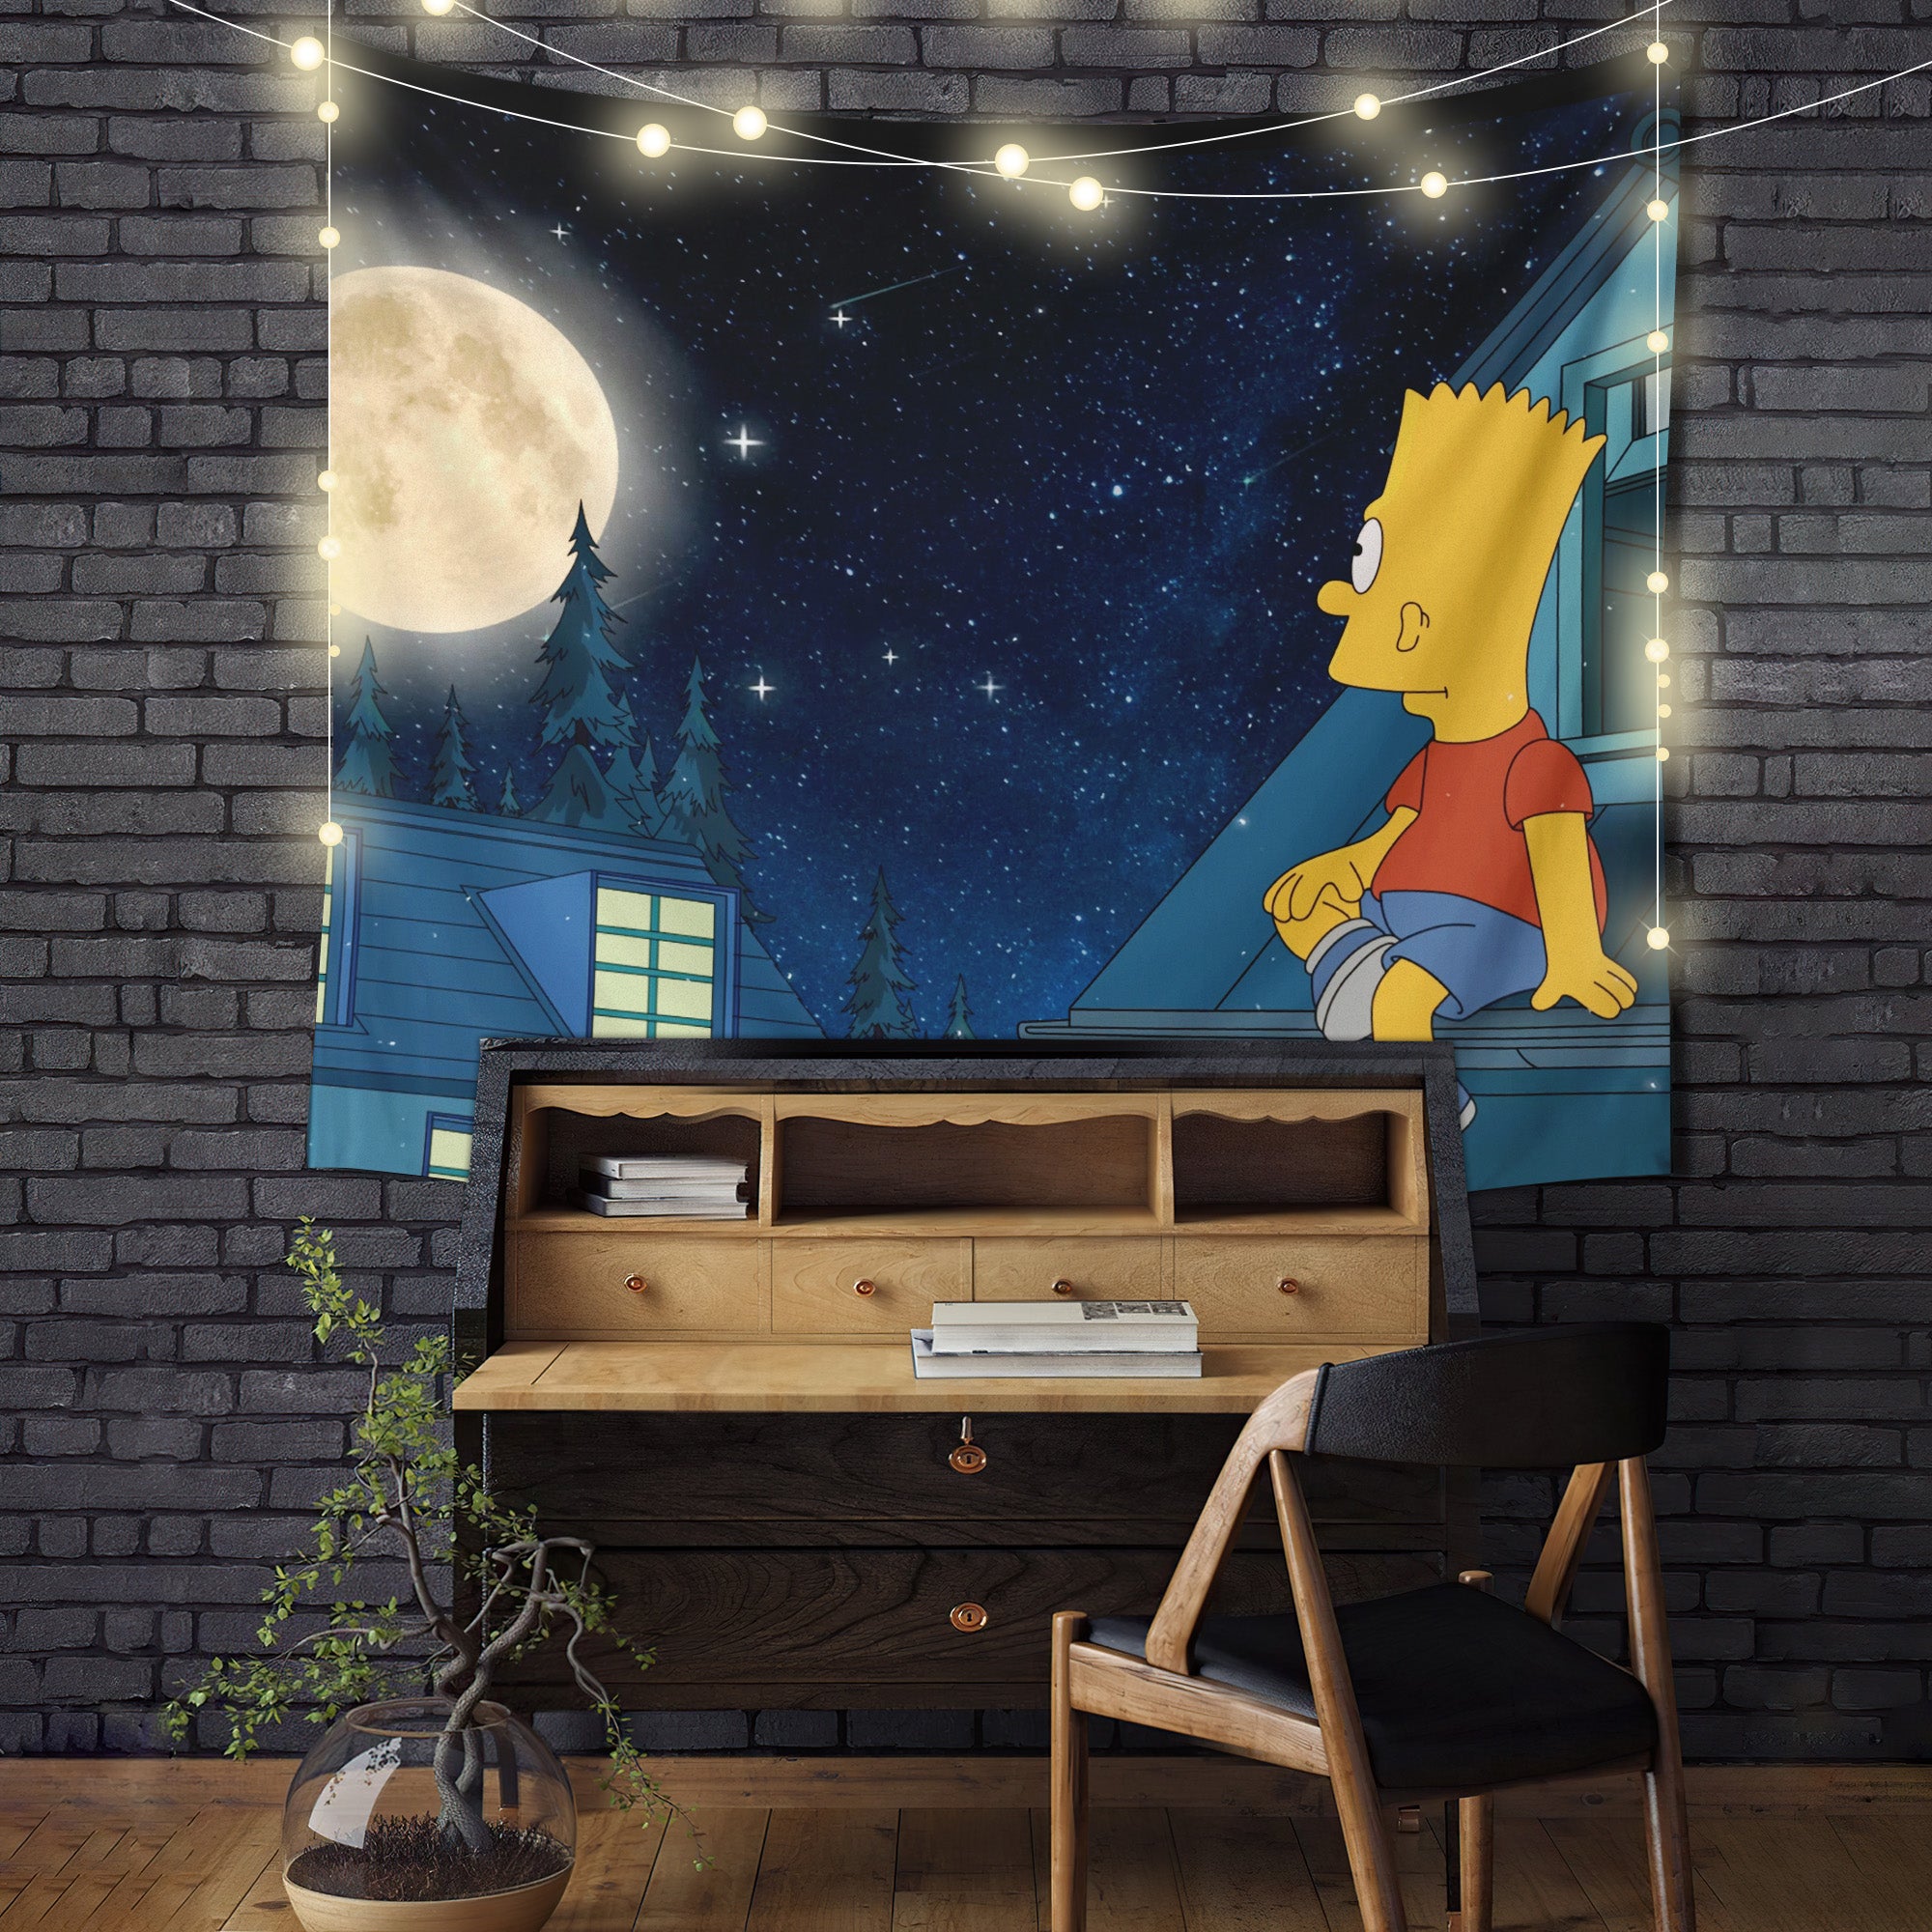 Simpsons Chill With Moon Tapestry Room Decor